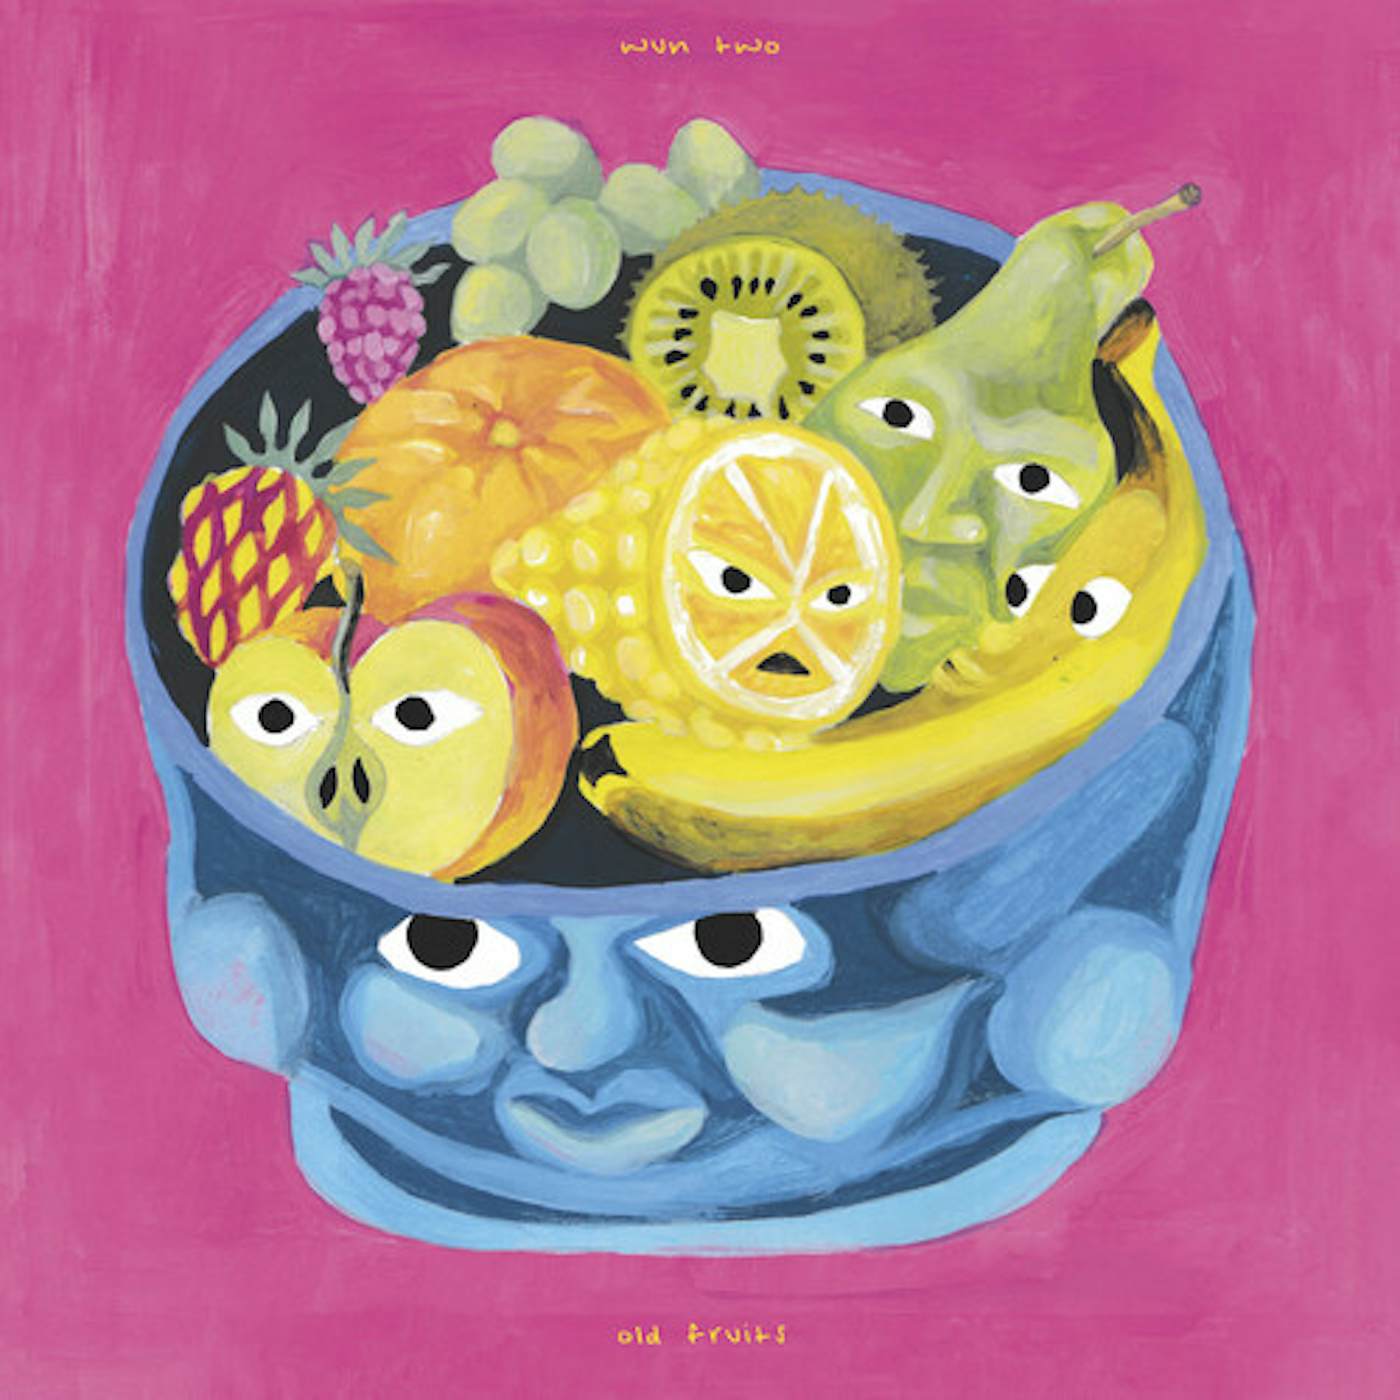 Wun Two old fruits Vinyl Record